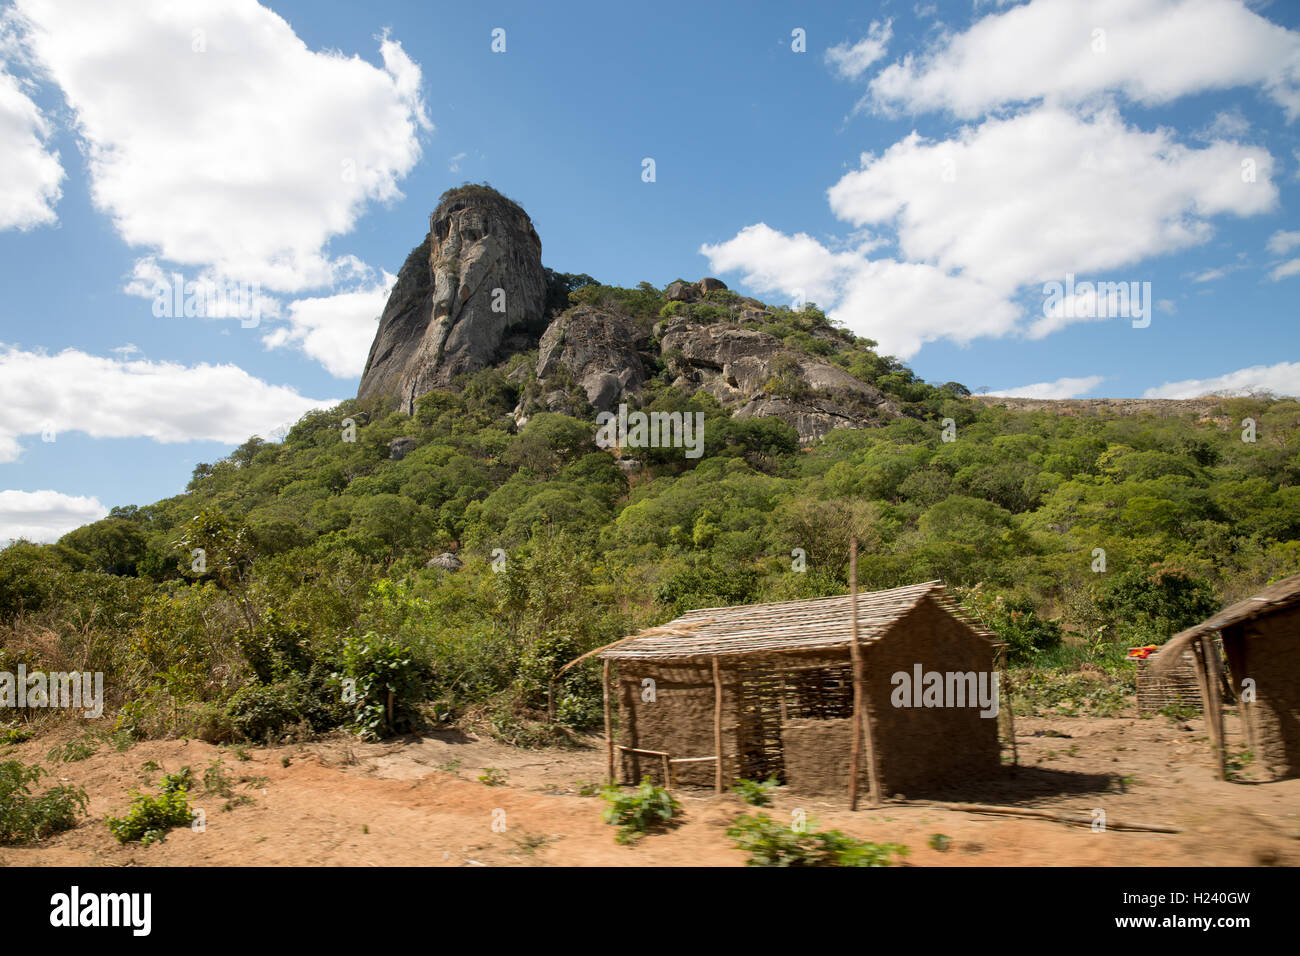 Lalaua district, Nampula Province, Mozambique, August 2015: Rocky outcrops dot the landscape. Photo by Mike Goldwater Stock Photo